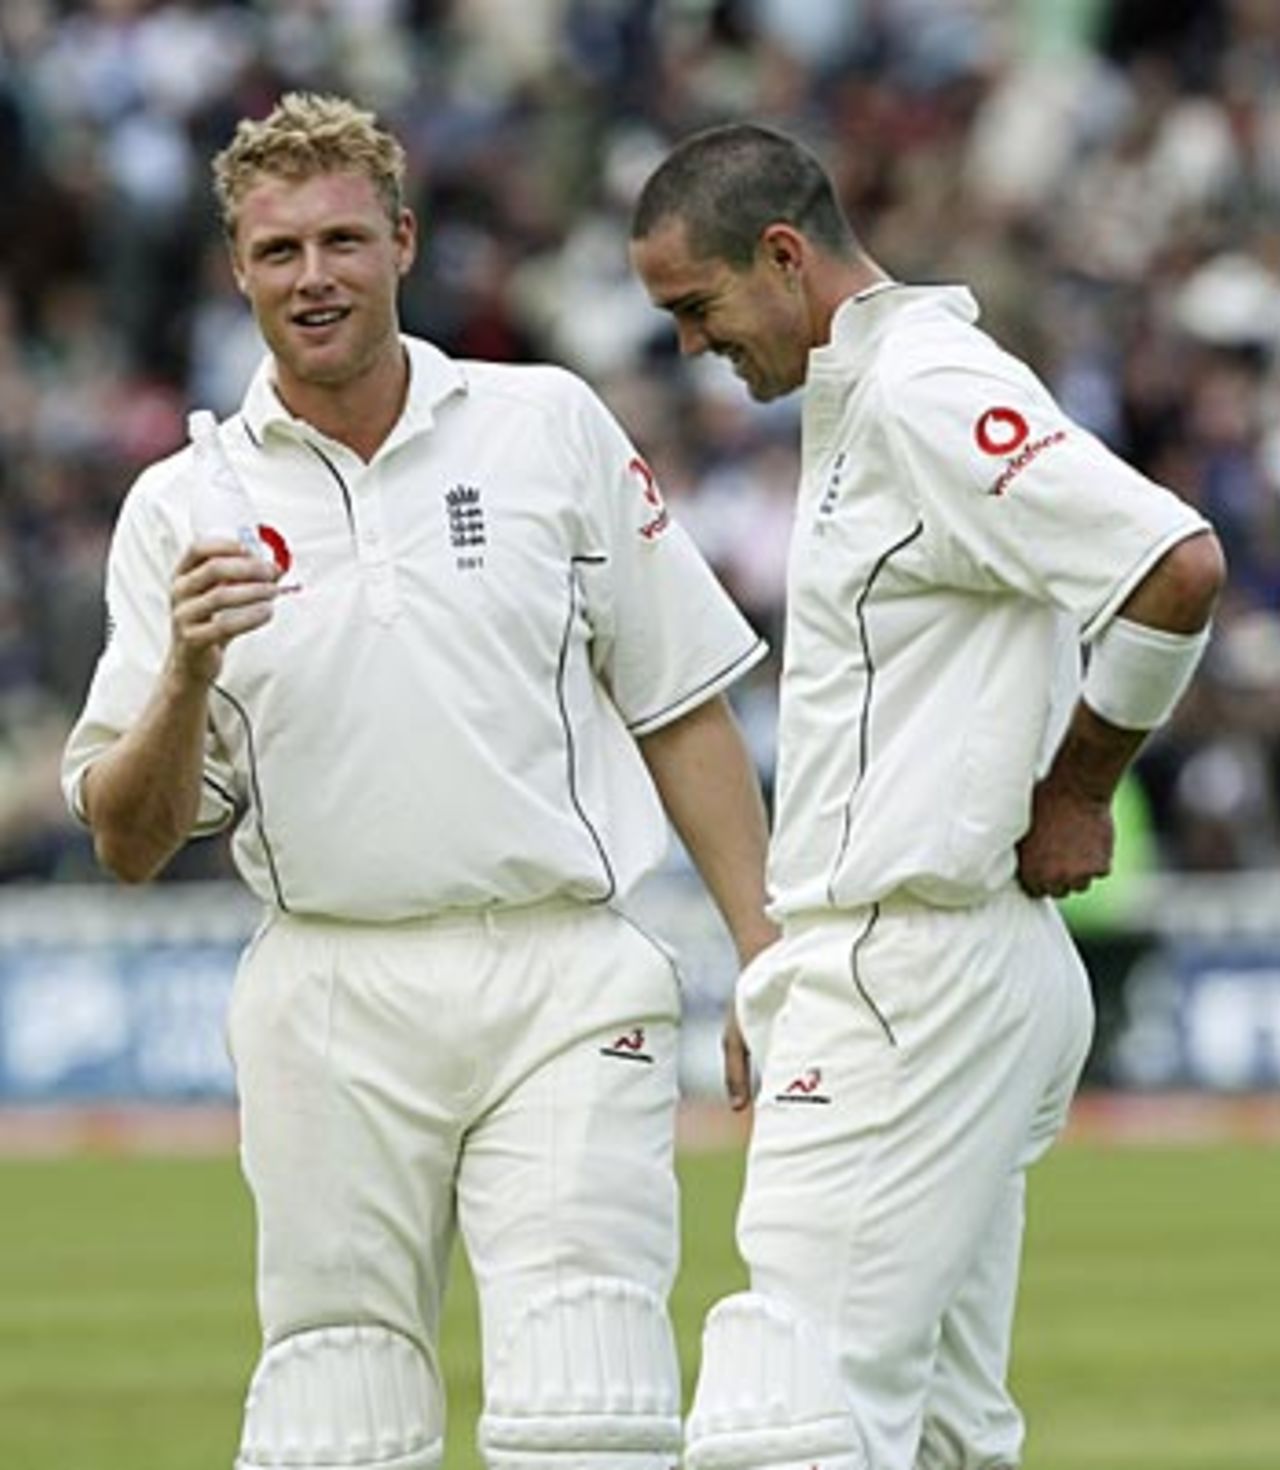 Andrew Flintoff and Kevin Pietersen share a joke and a drink, 2nd Test, Edgbaston, May 26, 2006